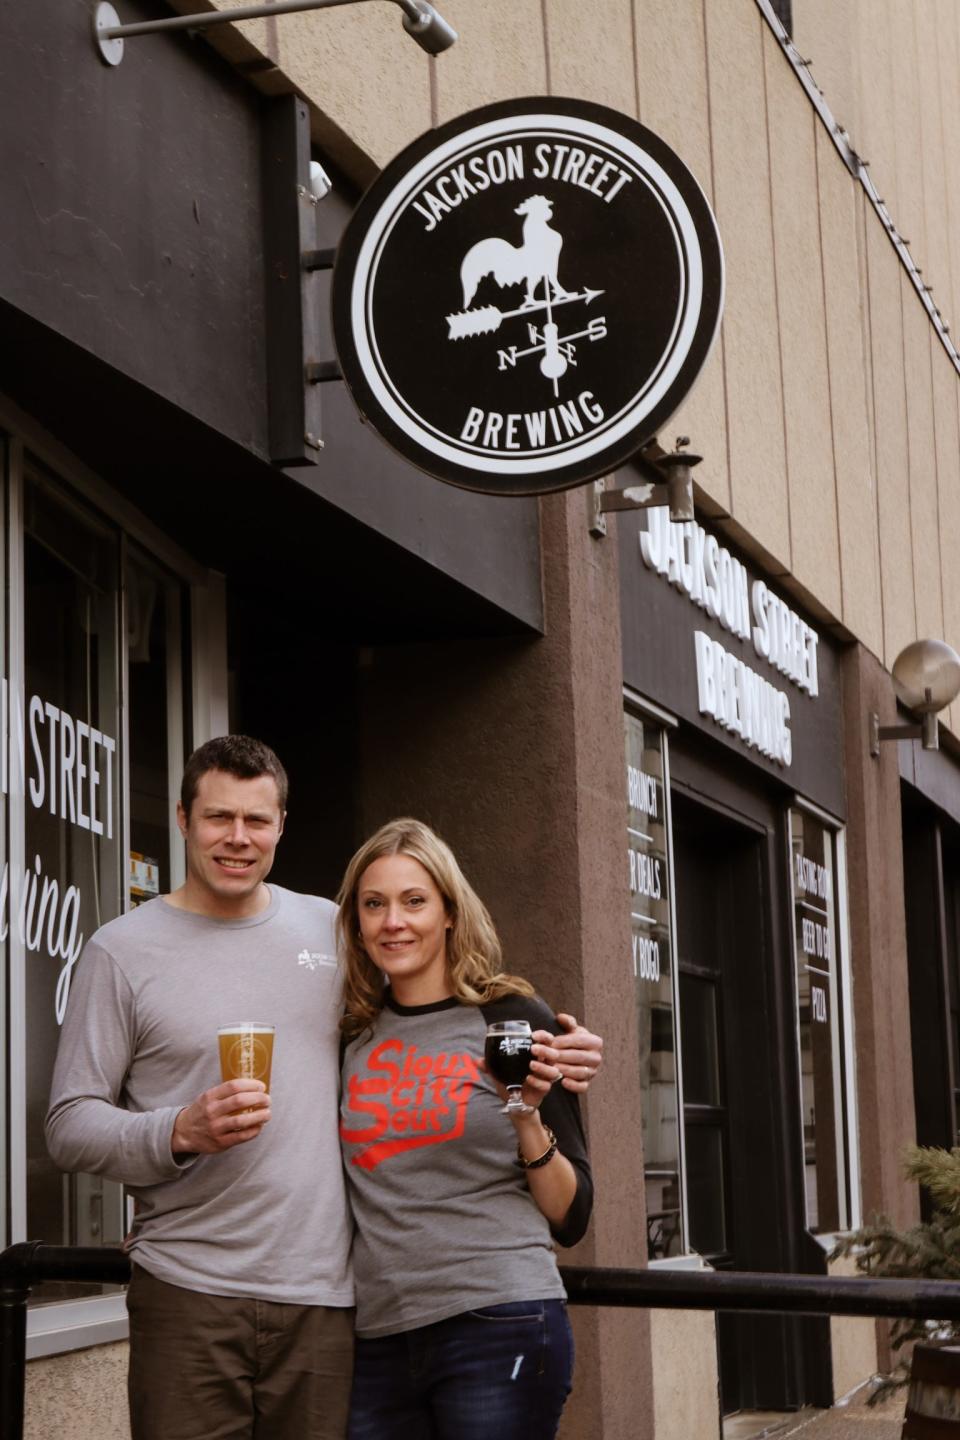 Dave Winslow and Tia Heidebrecht, a married couple and owners of Jackson Street Brewing, met when he was a meteorologist and she was a photographer and reporter at KTIV in Sioux City.